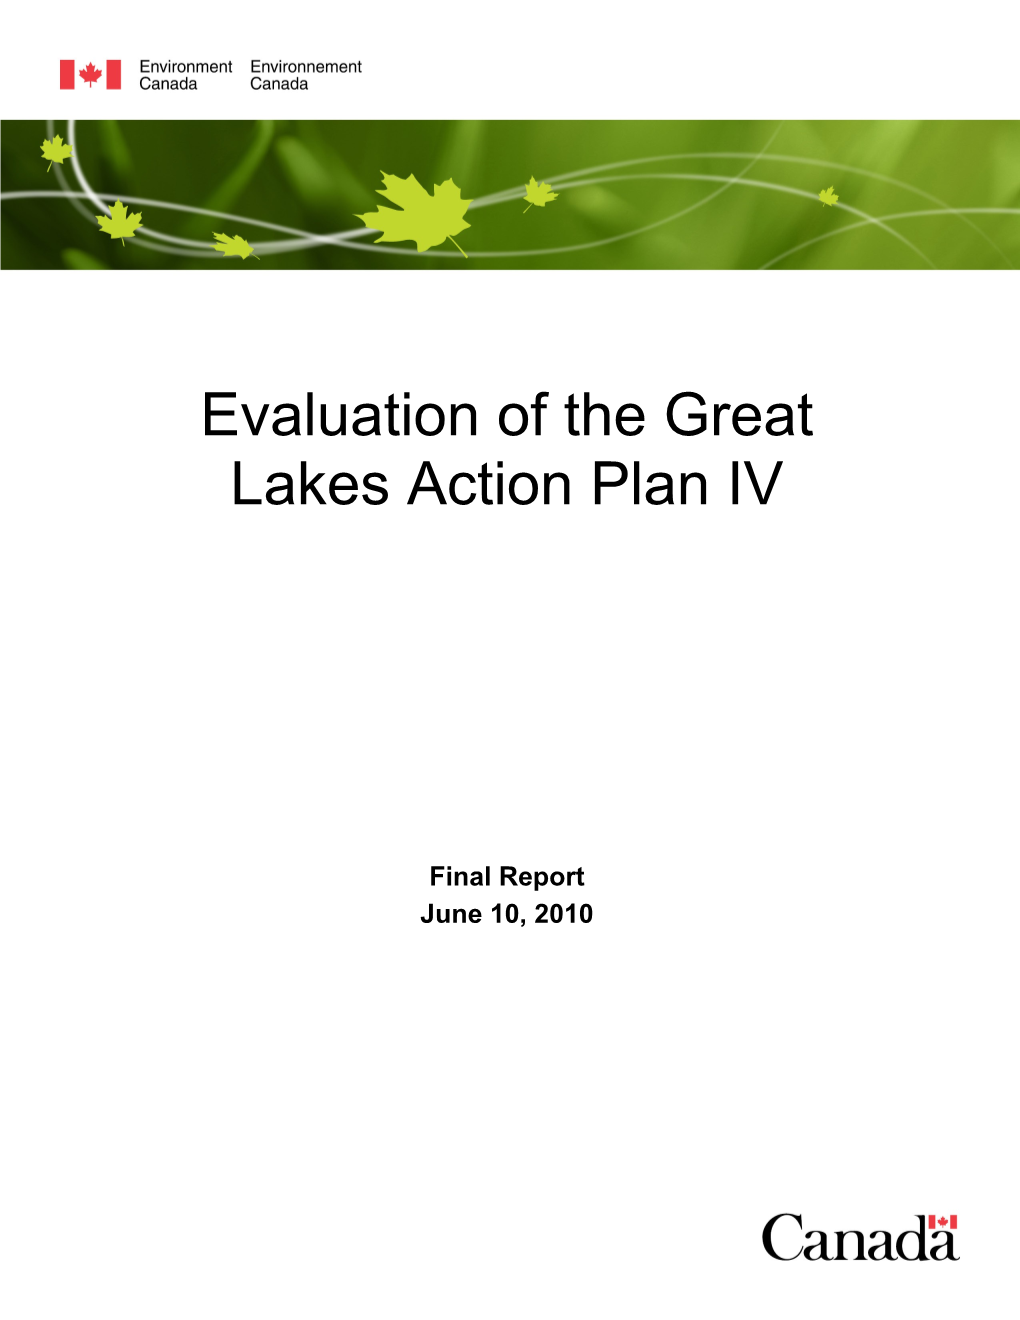 Evaluation of the Great Lakes Action Plan IV